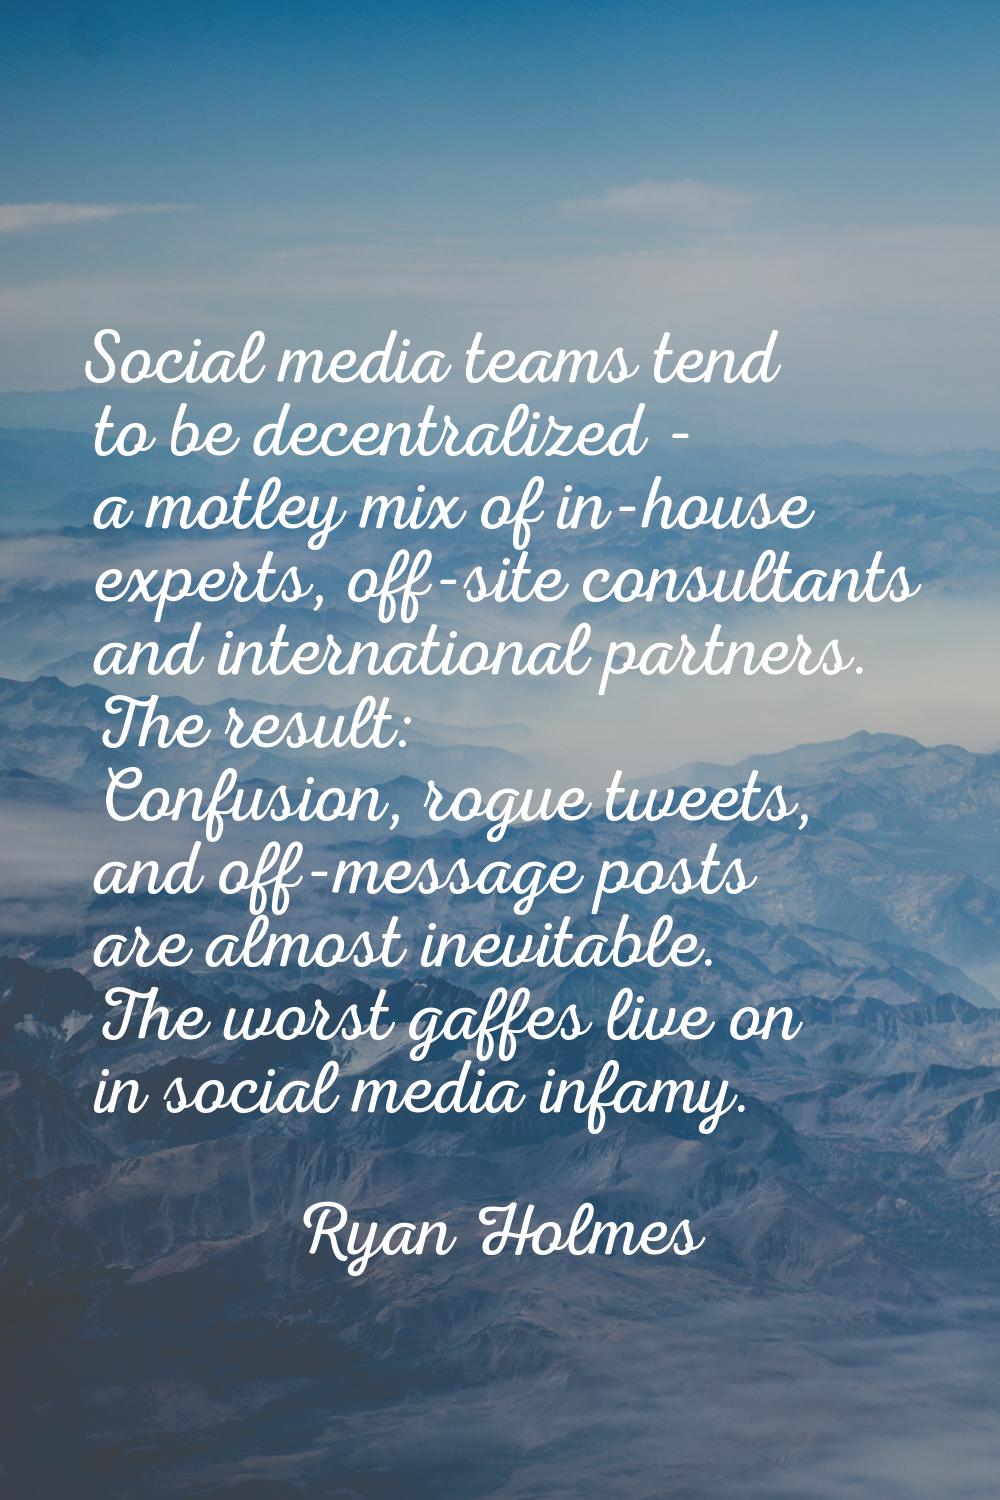 Social media teams tend to be decentralized - a motley mix of in-house experts, off-site consultant